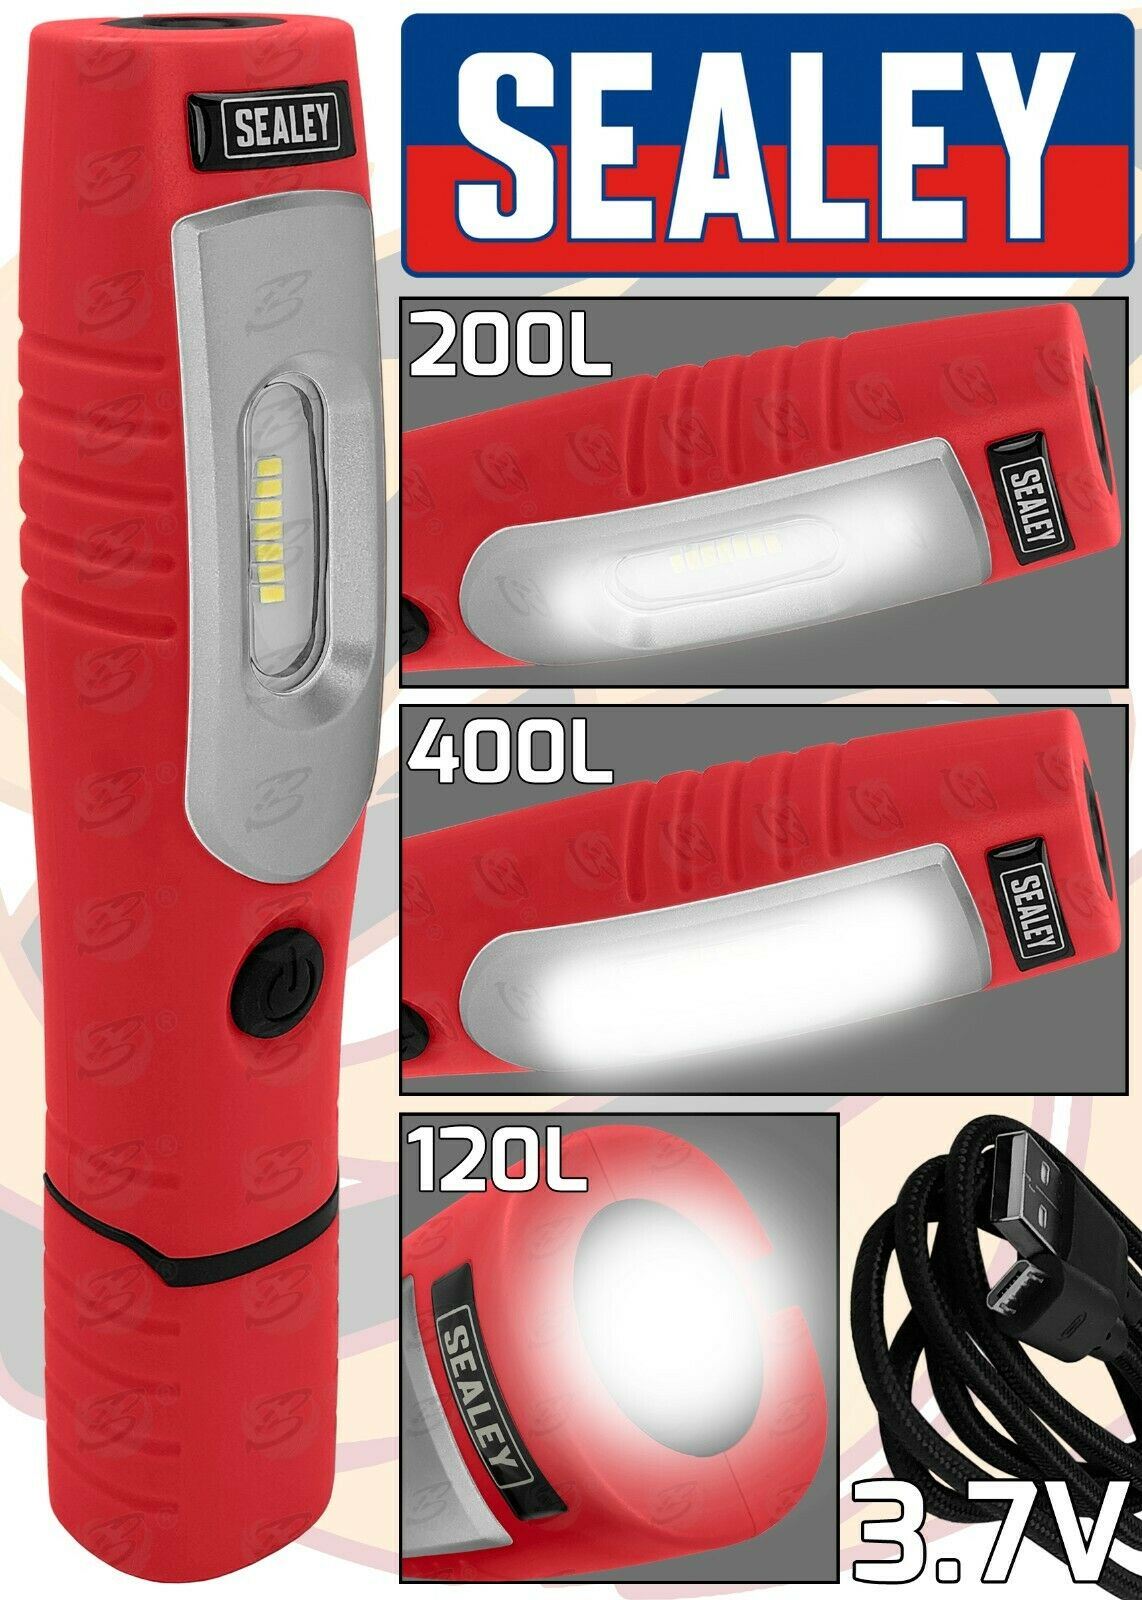 SEALEY RECHARGEABLE SMD LED LI - ION WORK LIGHT ( RED )